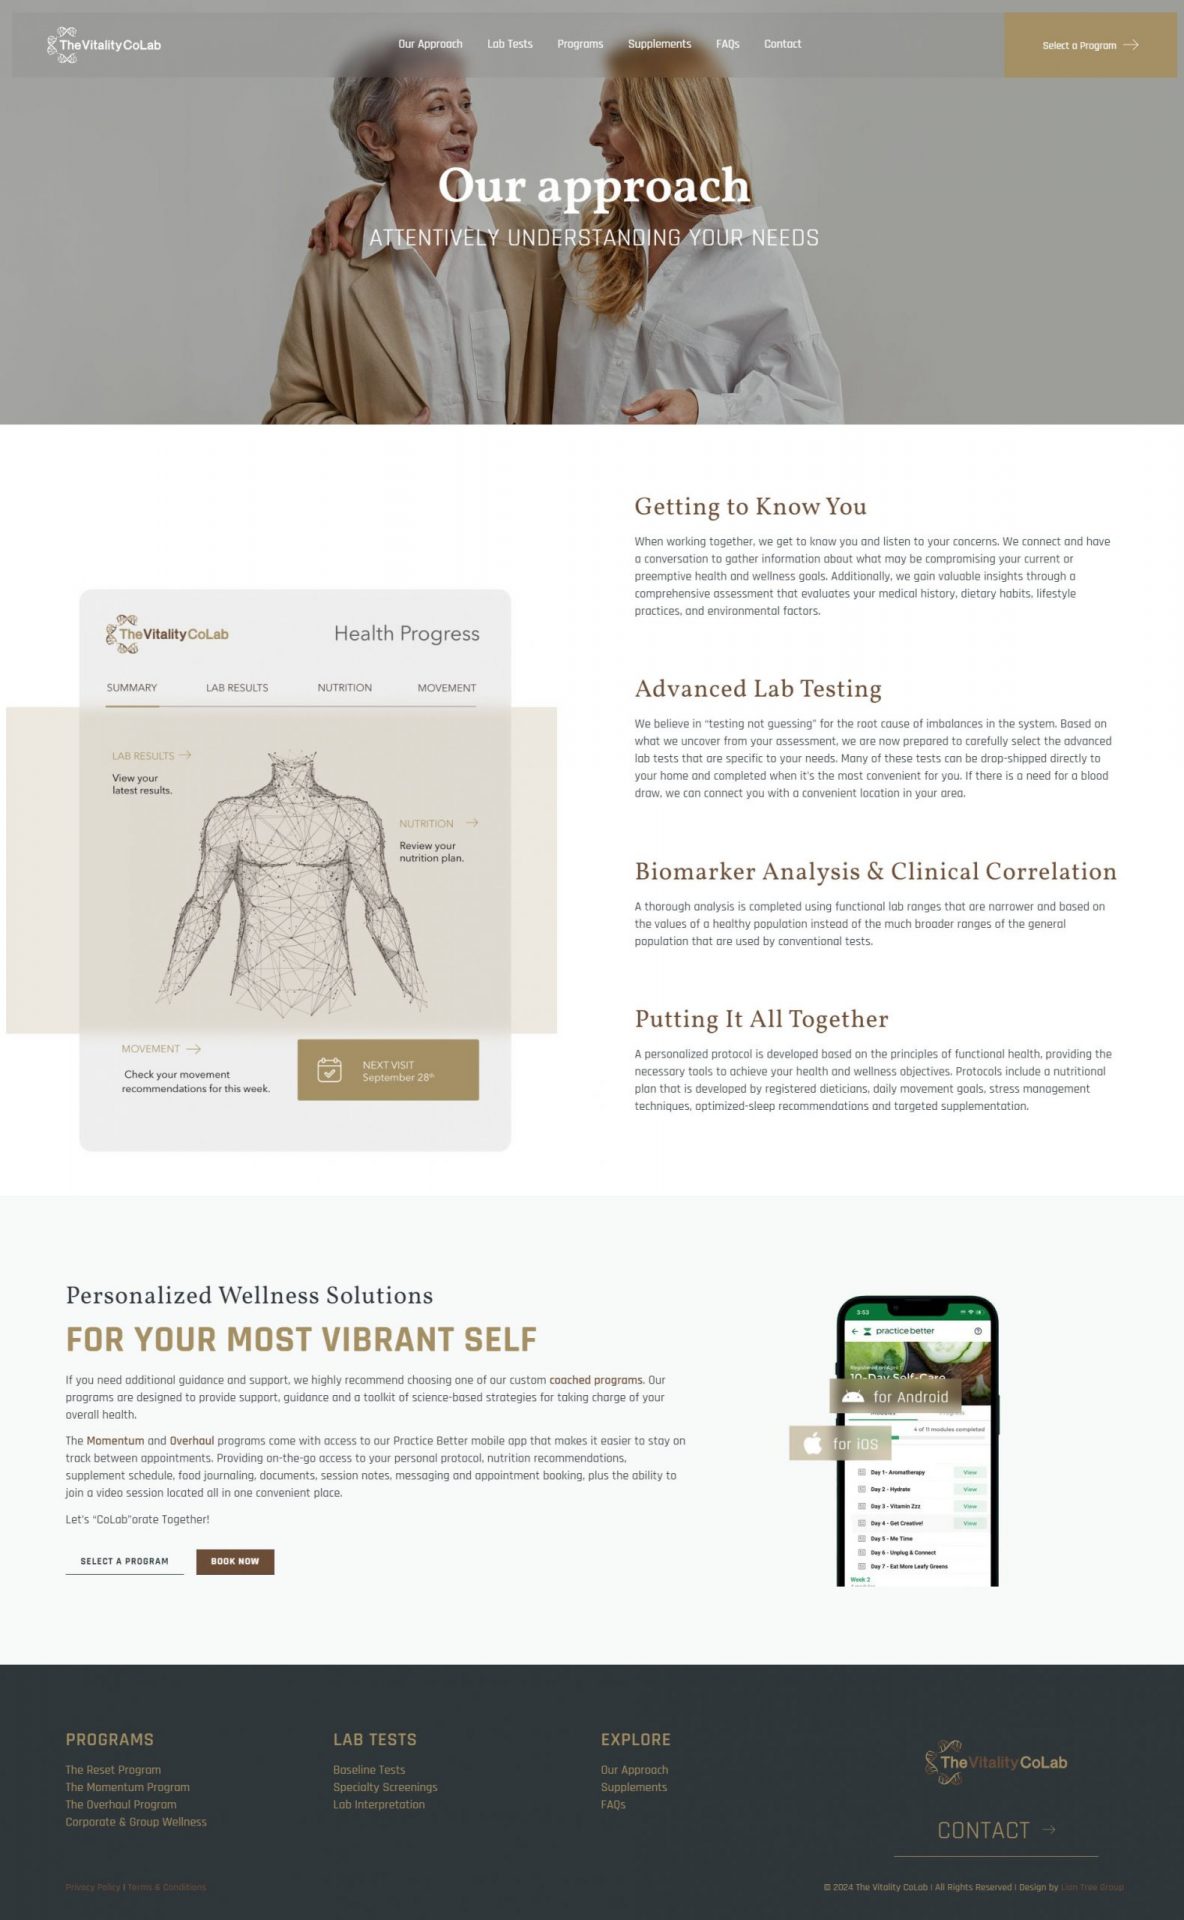 The Vitality CoLab our approach page